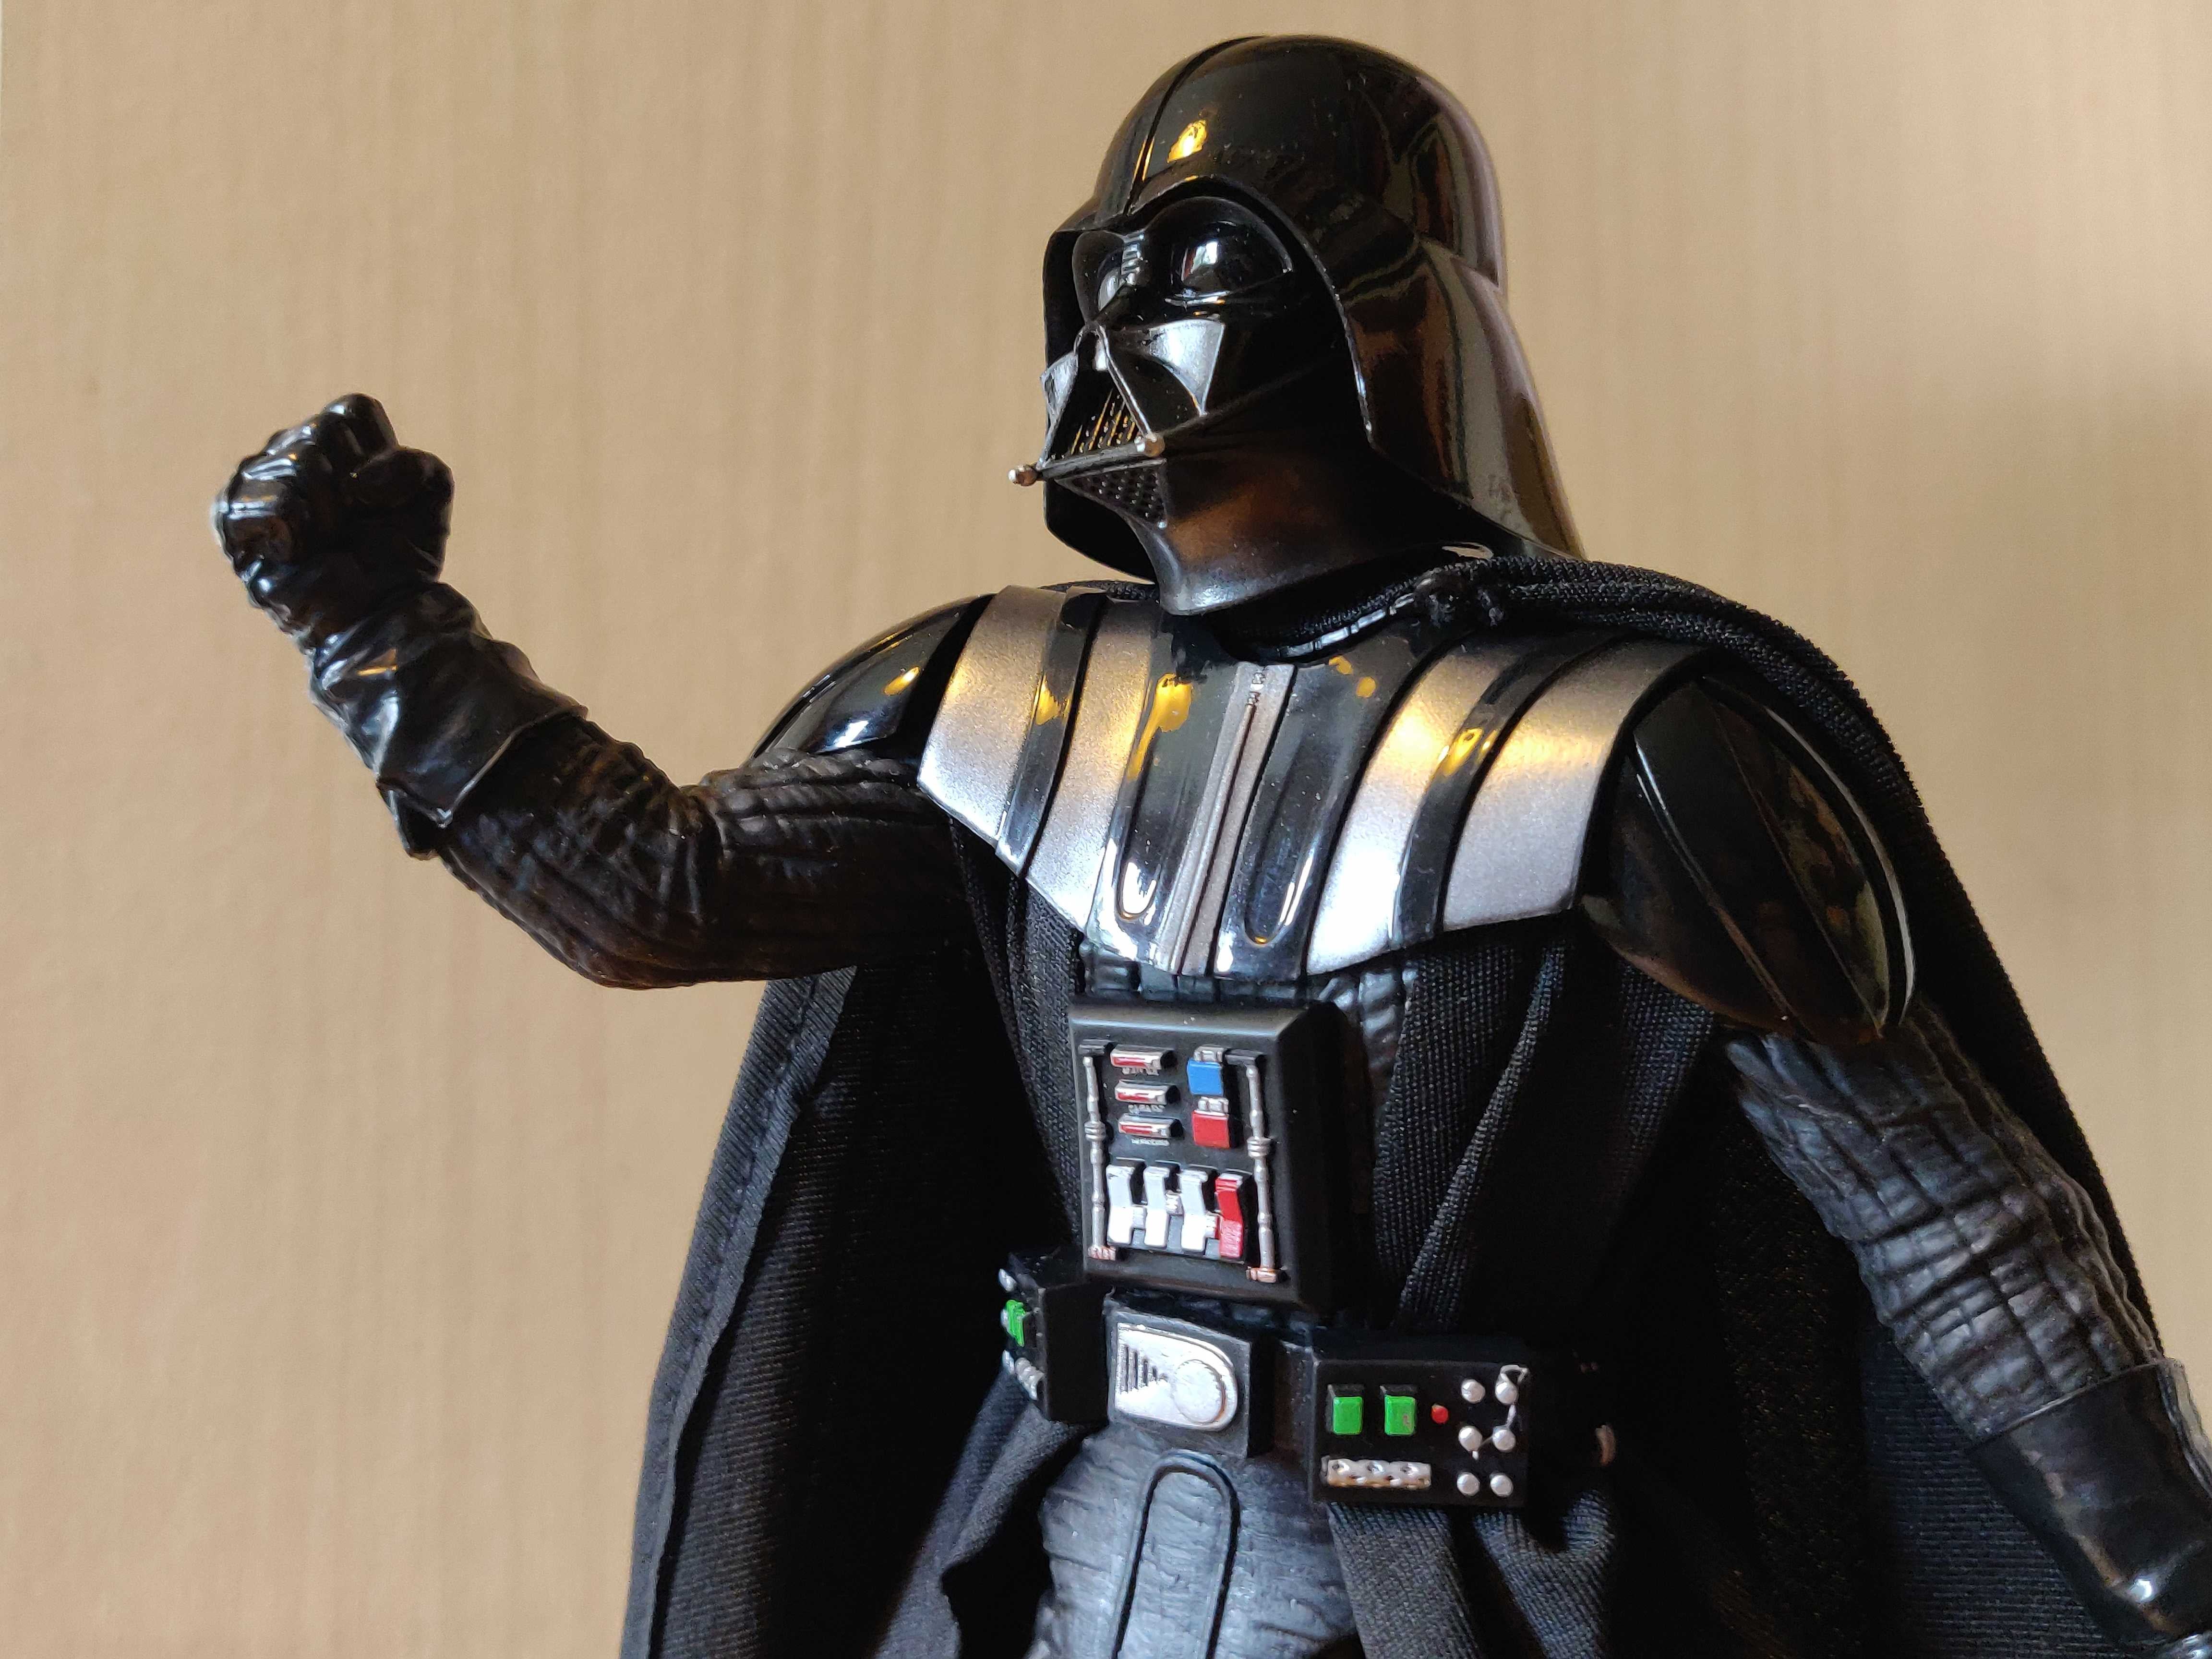 Hasbros New Darth Vader Figure Is Most Impressive And Most